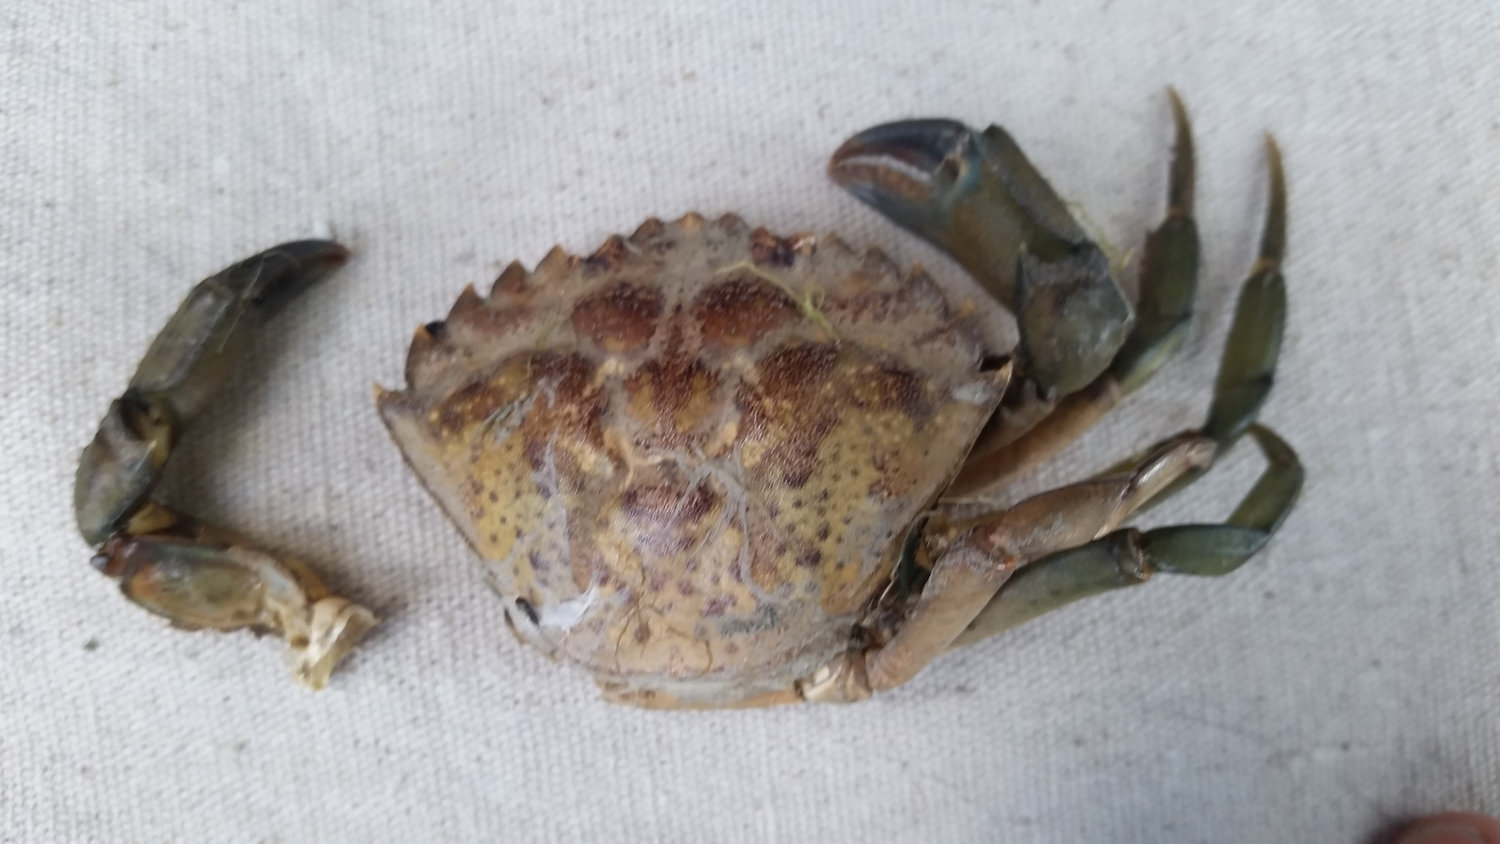 A European green crab shell that was found last August in Drayton Harbor.